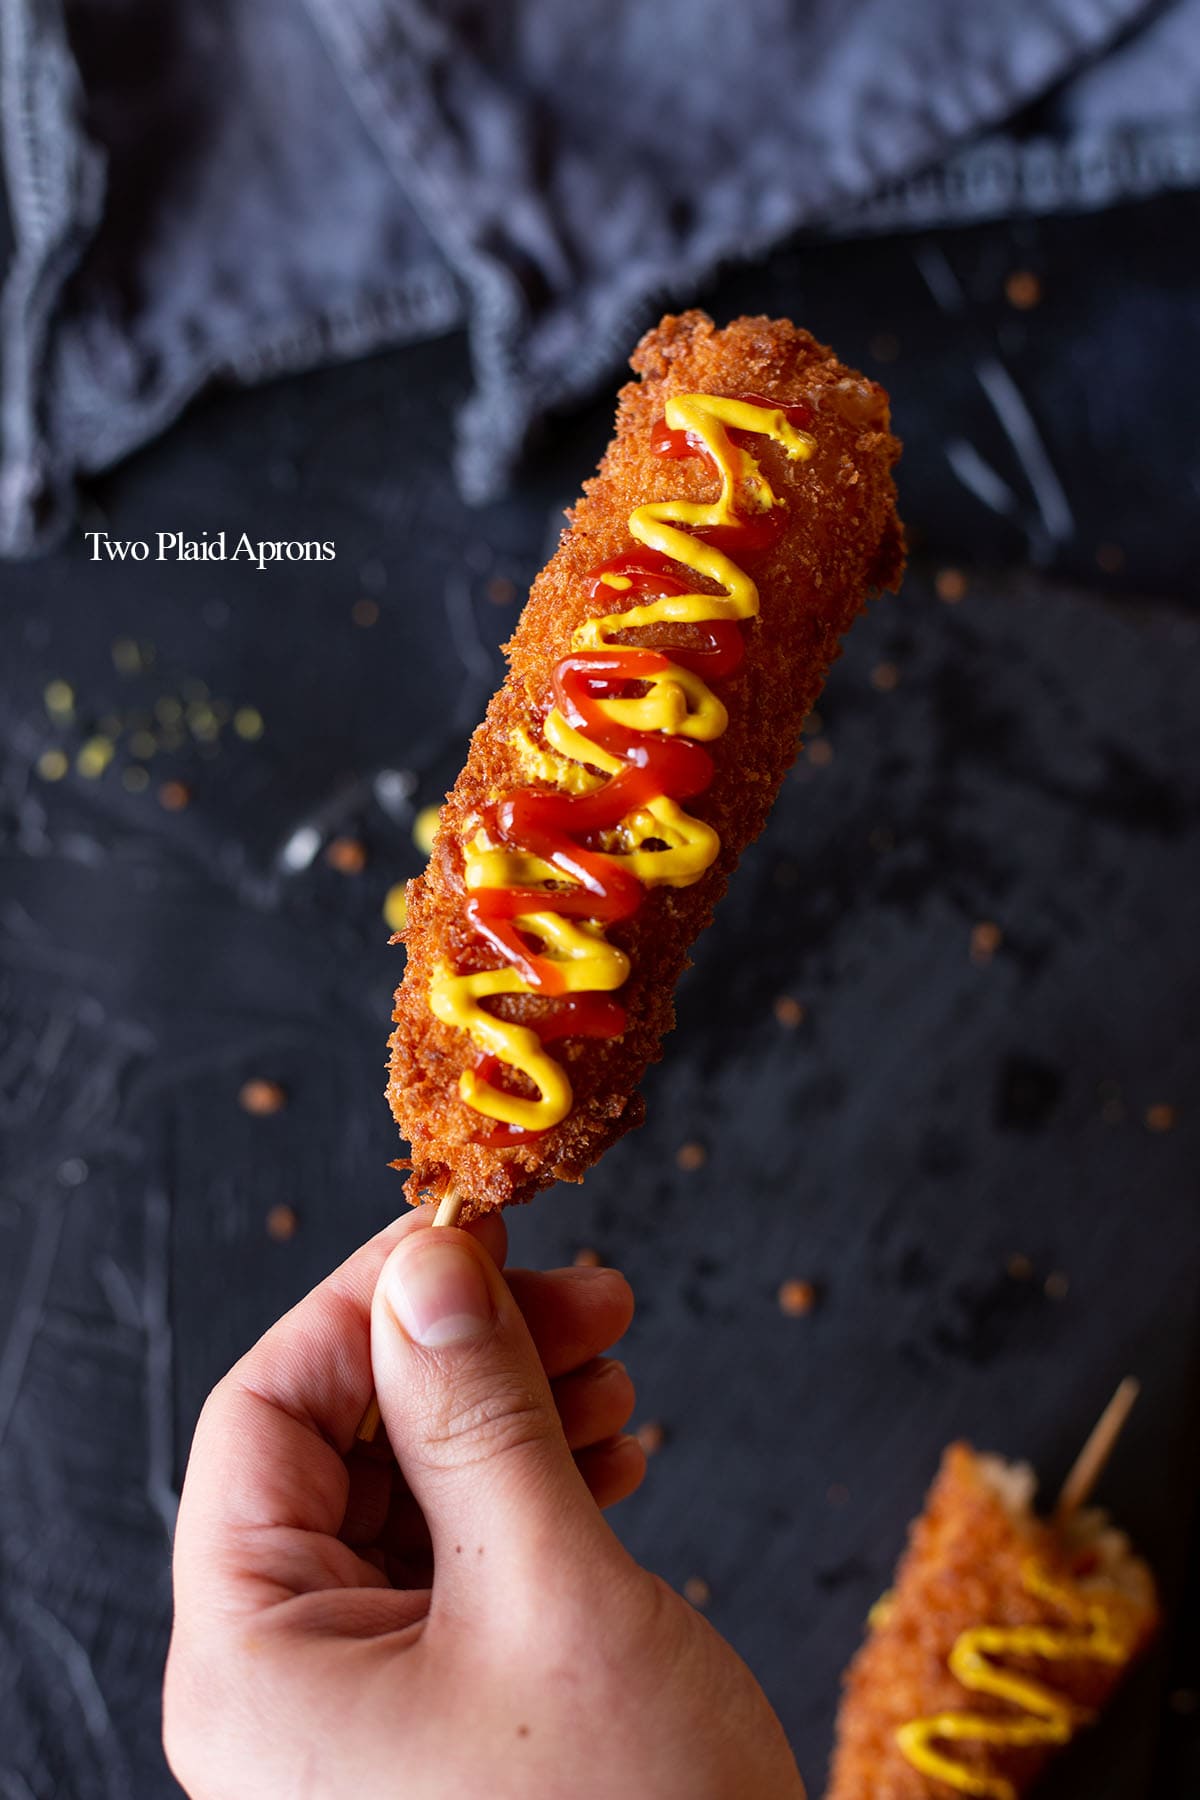 Holding a Korean corn dog drizzled with ketchup and yellow mustard.